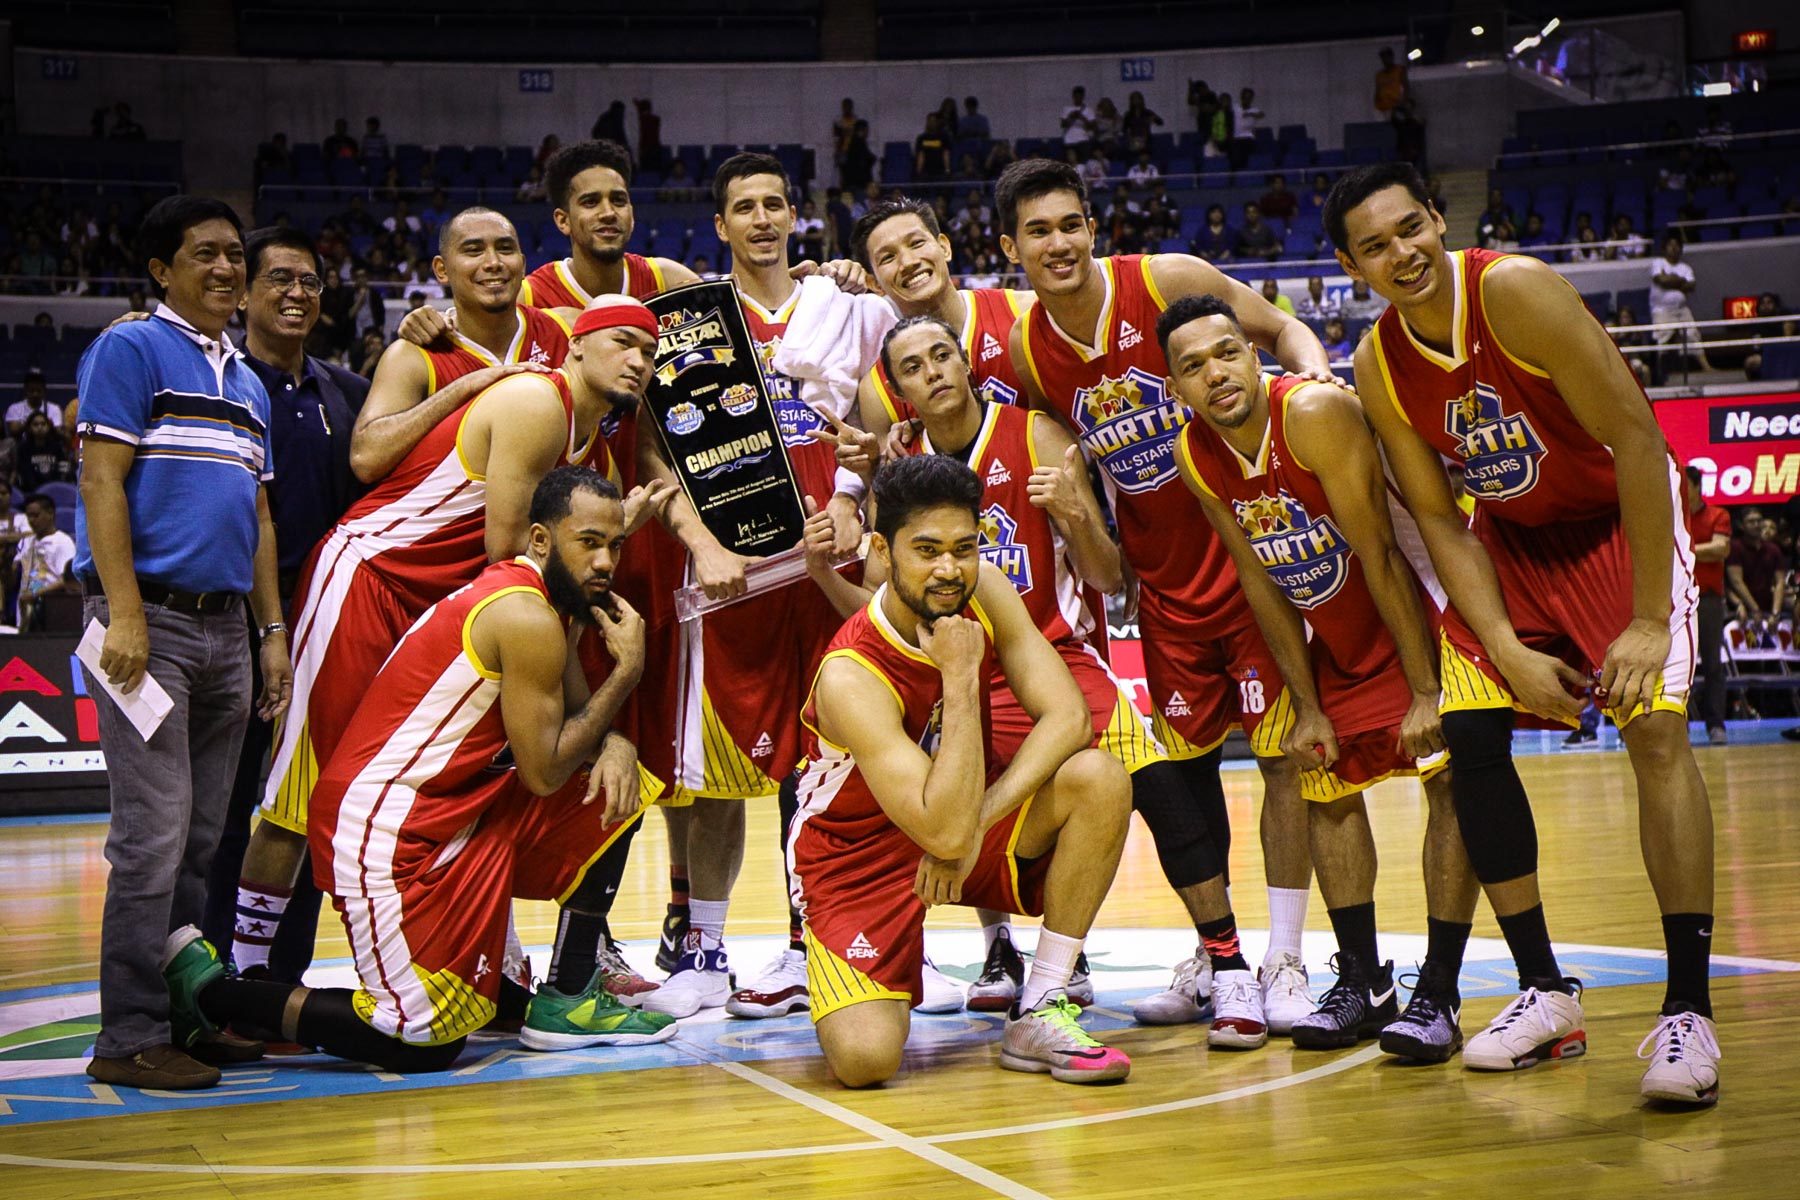 PBA targets full All-Star Week with games in Luzon, Visayas, Mindanao